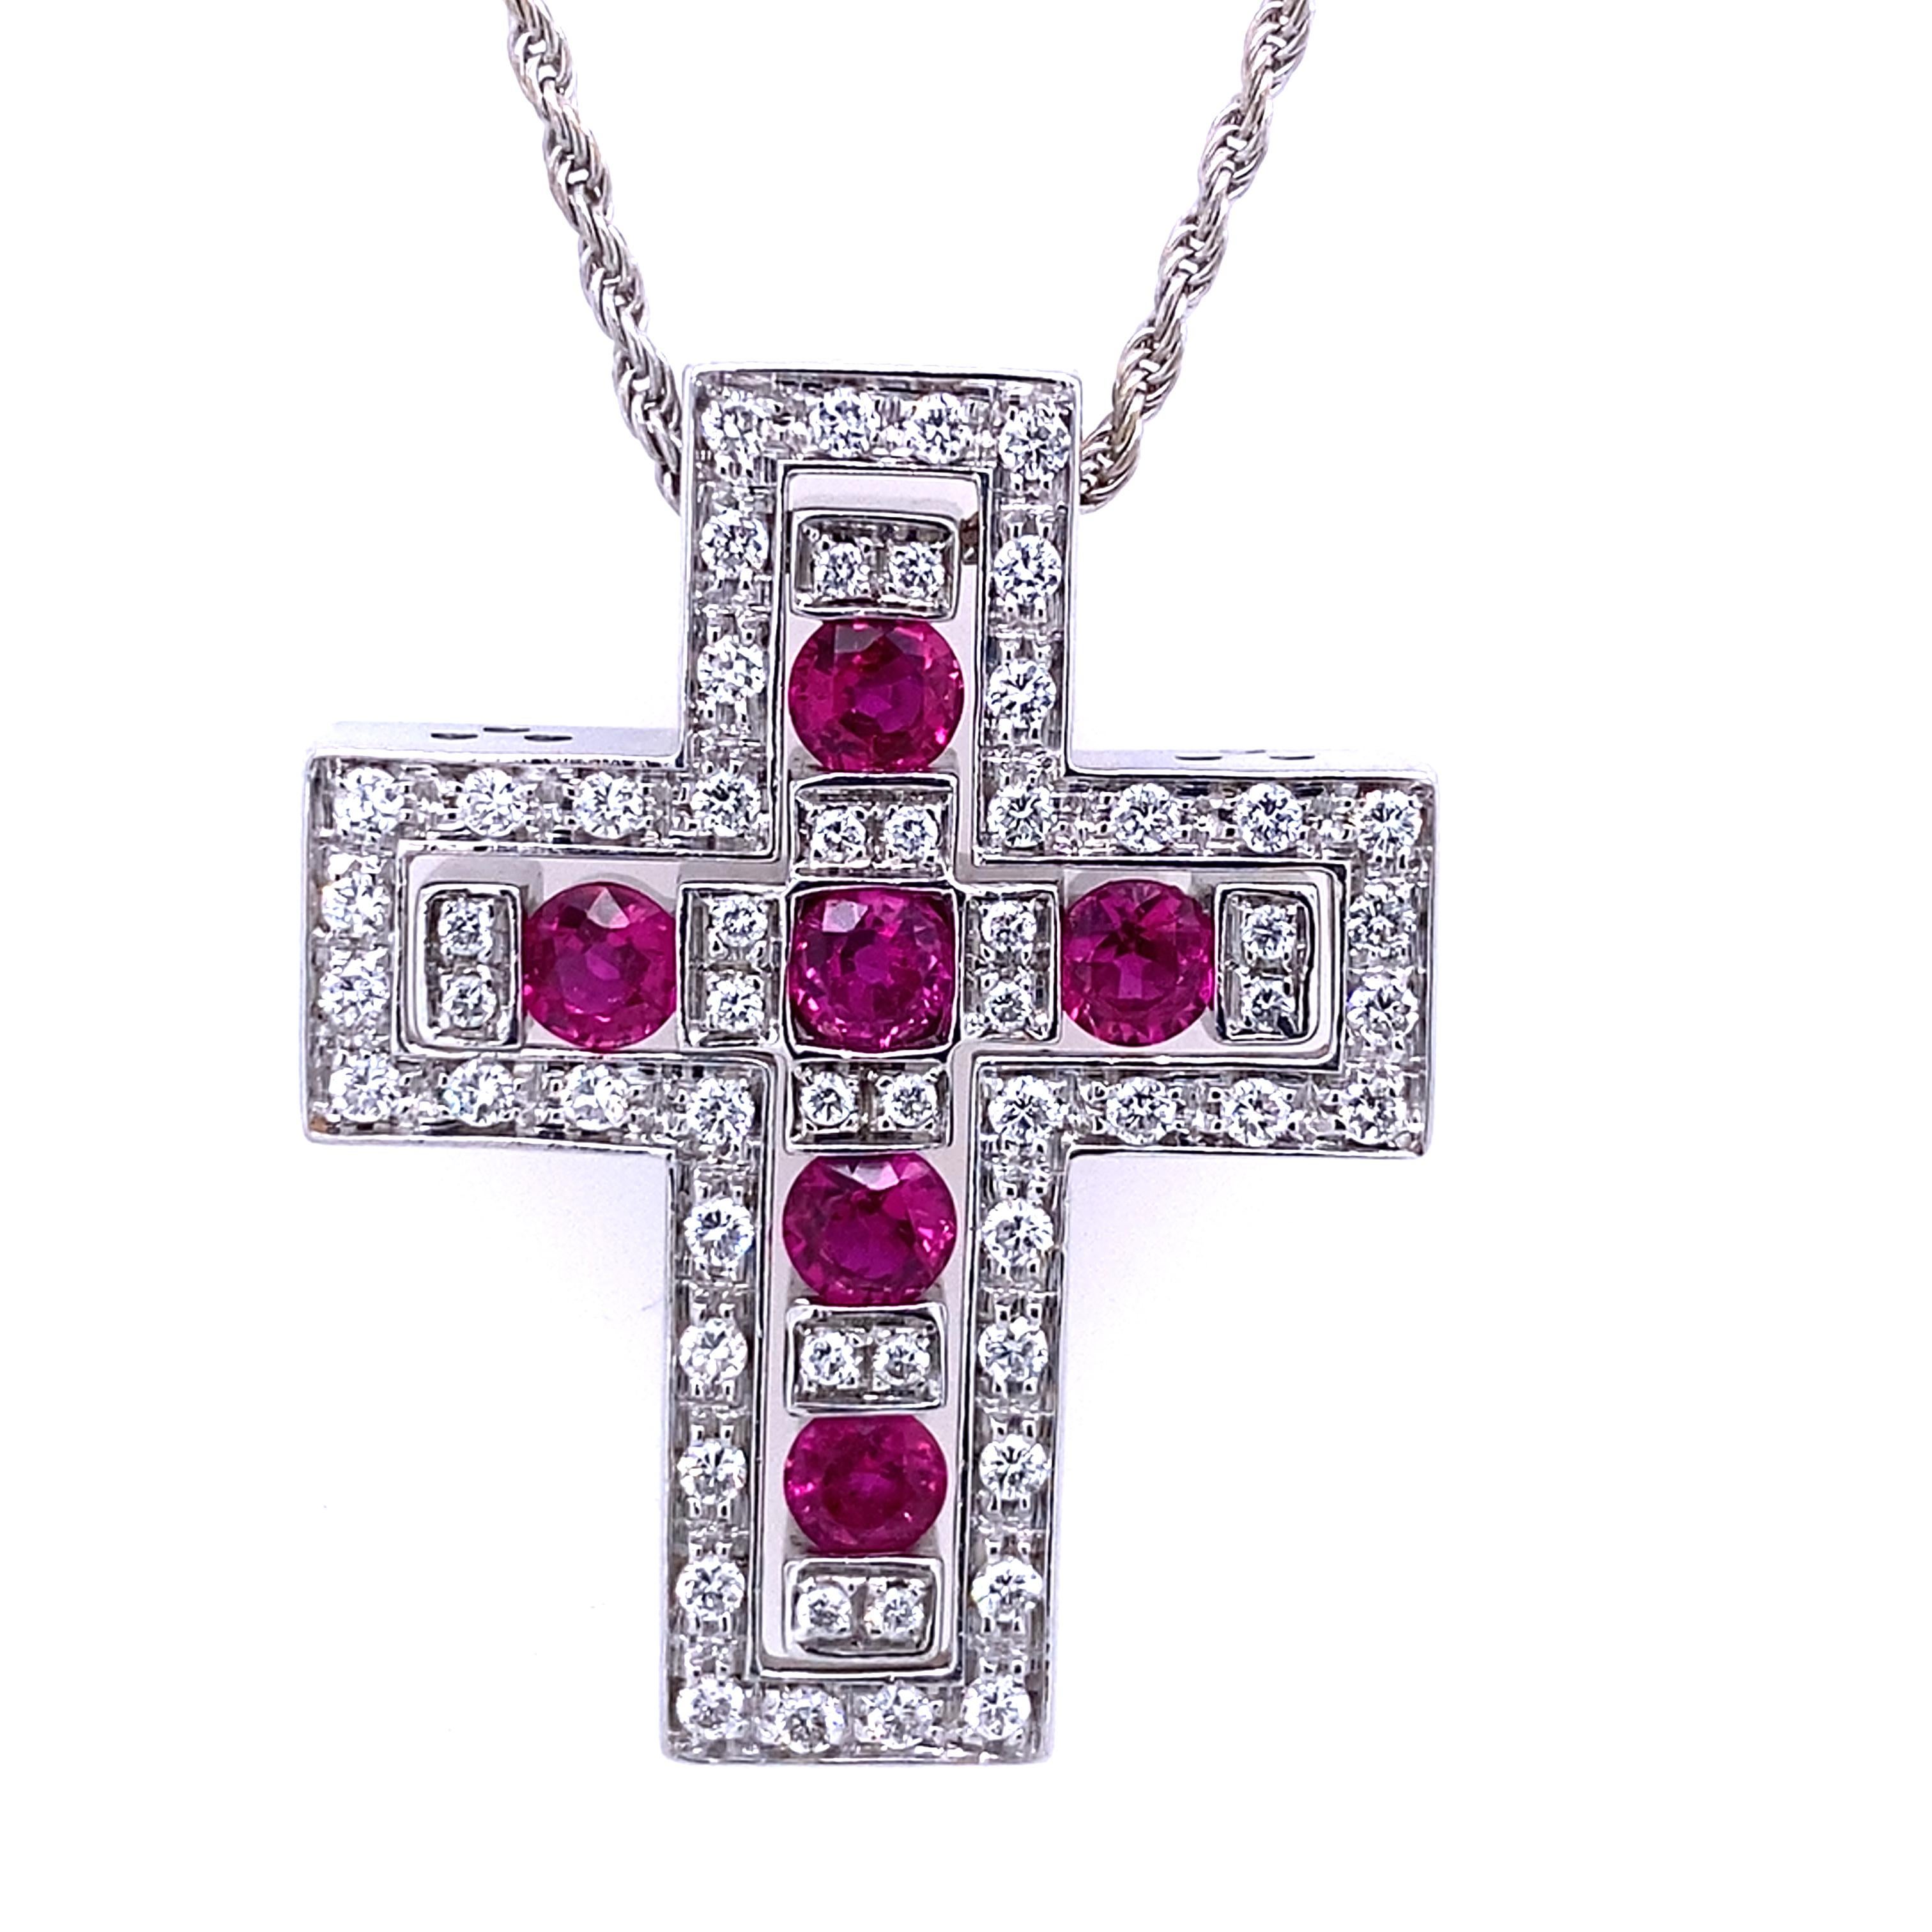 A stunning combination of a ruby cross pendant and a diamond cross pendant. The ruby cross pendant is set with six fine quality ruby gemstones, surrounded by diamonds and enhanced with 18ct white gold. The pendant is a symbol of faith, hope and